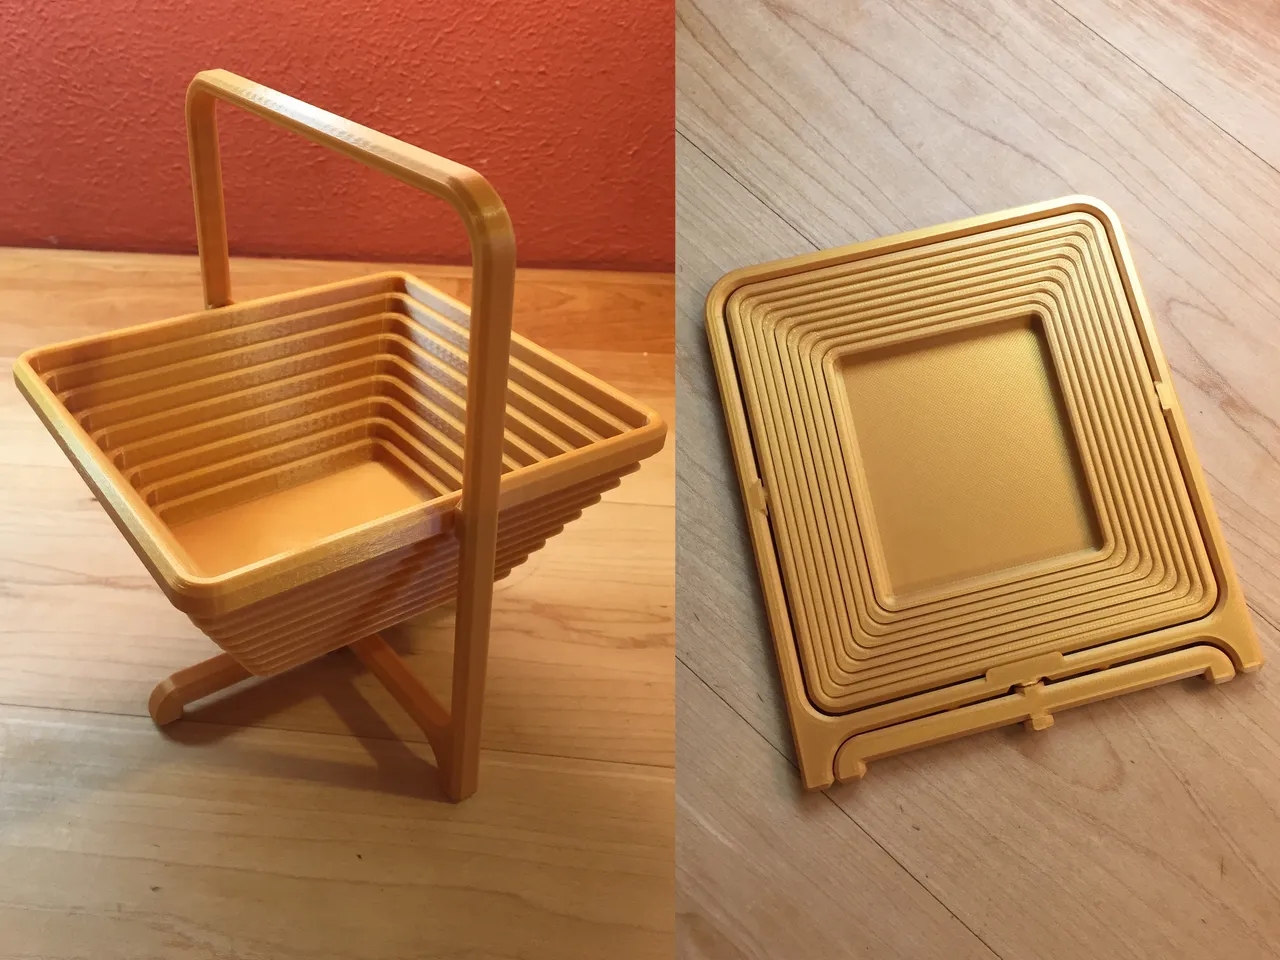 Collapsible Basket (optimized) by 3D Printing World